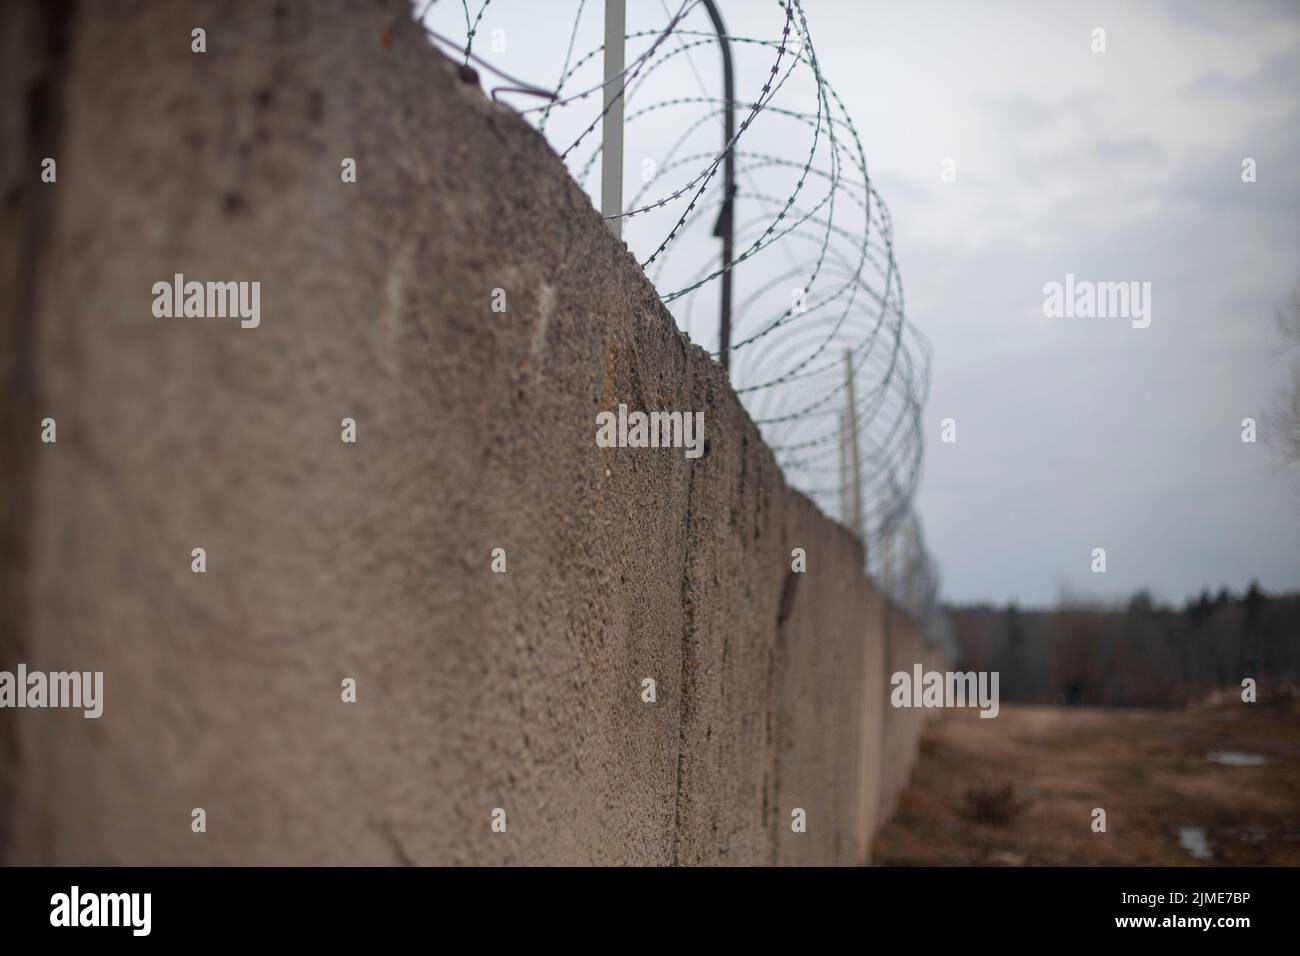 Fence with barbed wire. Fencing around the territory. Stock Photo